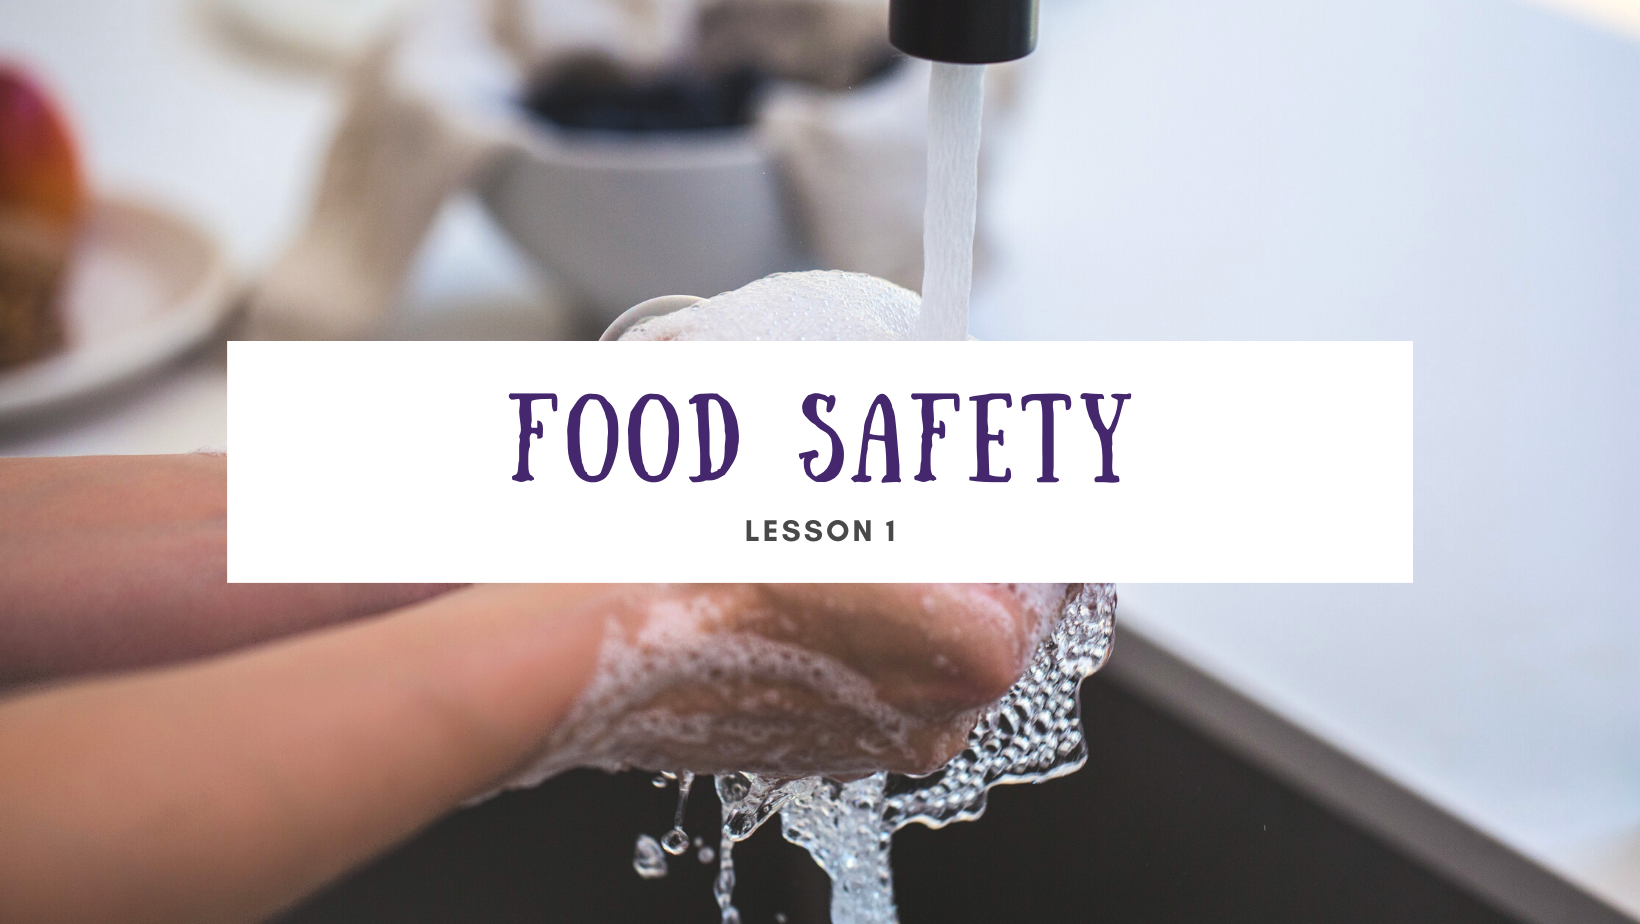 Lesson 1: Food safety